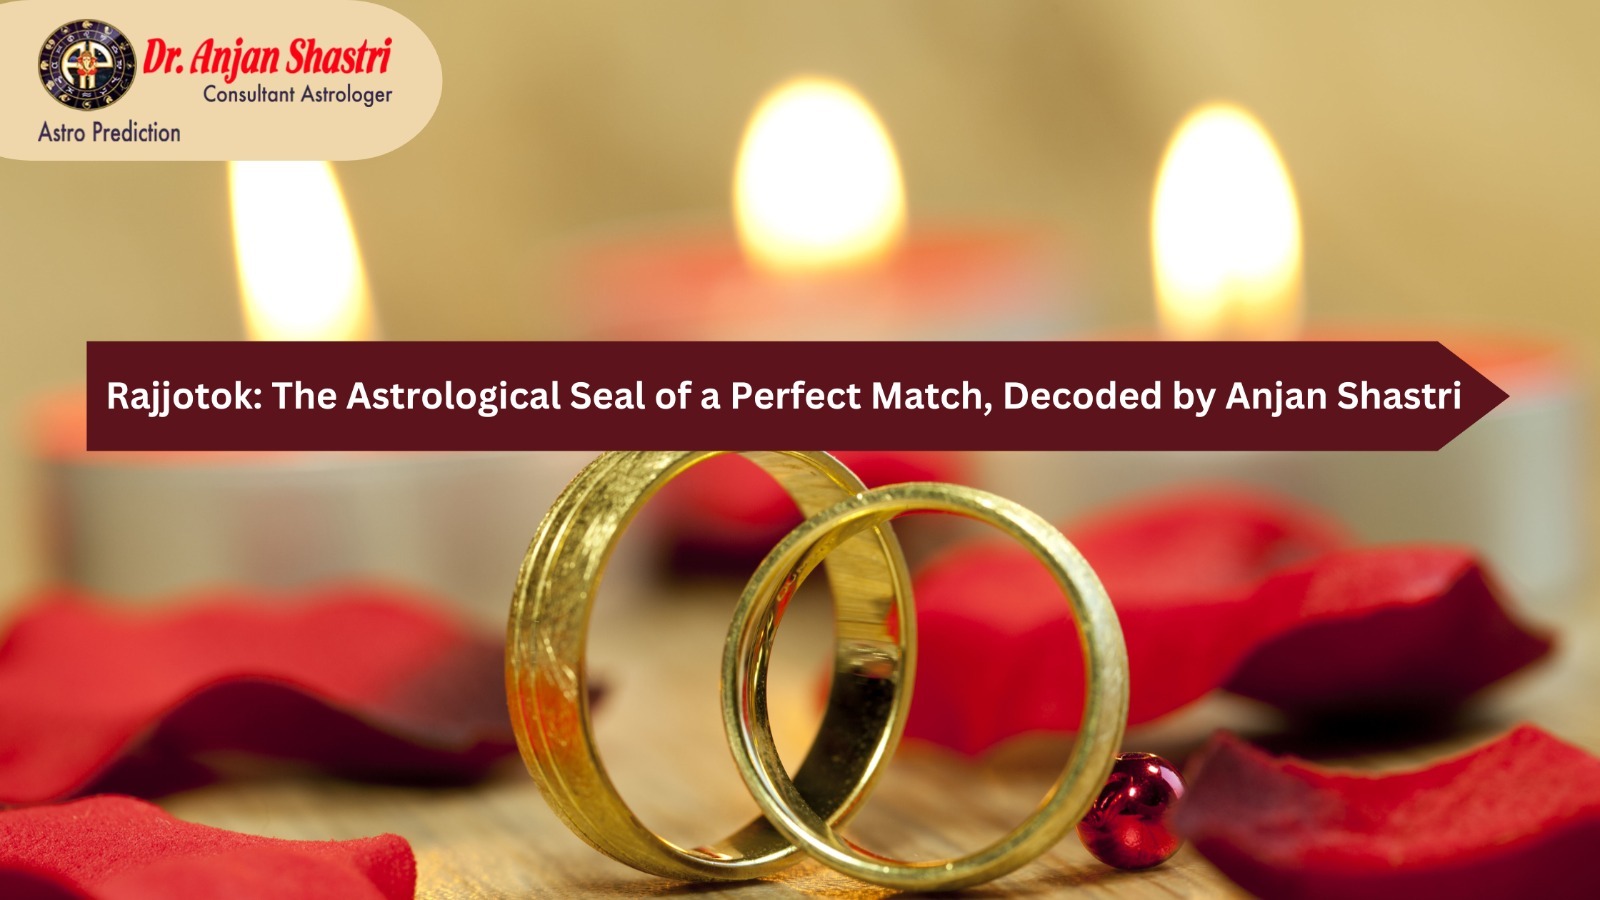 Rajjotok: The Astrological Seal of a Perfect Match, Decoded by Anjan Shastri